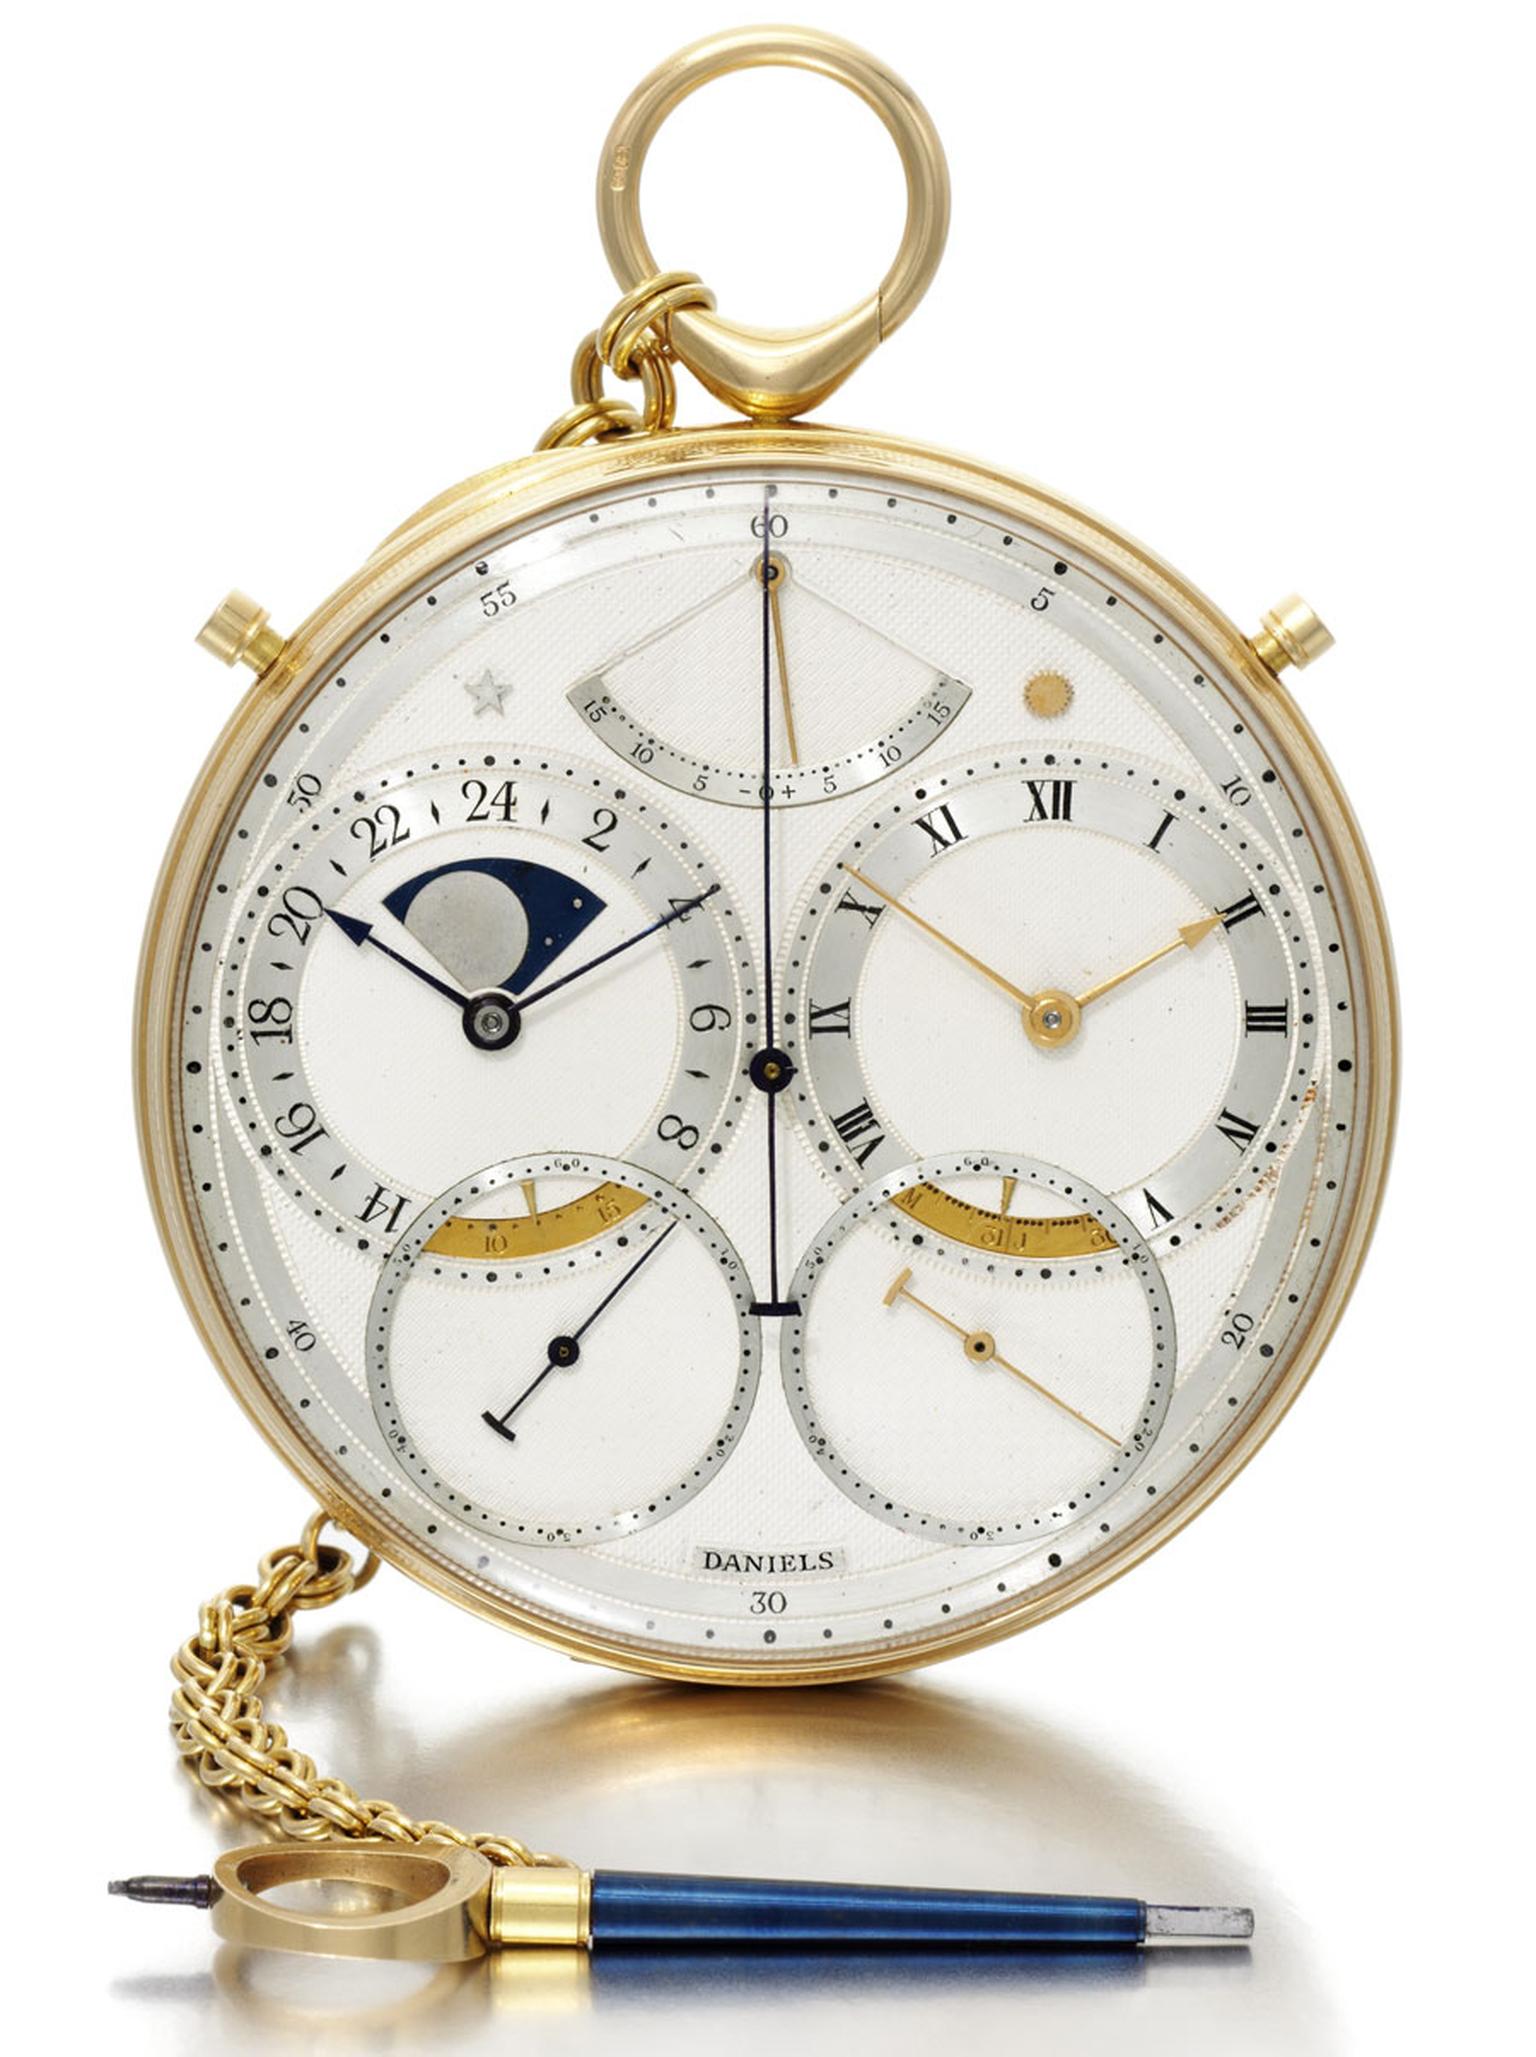 George Daniels 18K YELLOW GOLD CHRONOGRAPH WITH DANIELS INDEPENDENT DOUBLE-WHEEL ESCAPEMENT